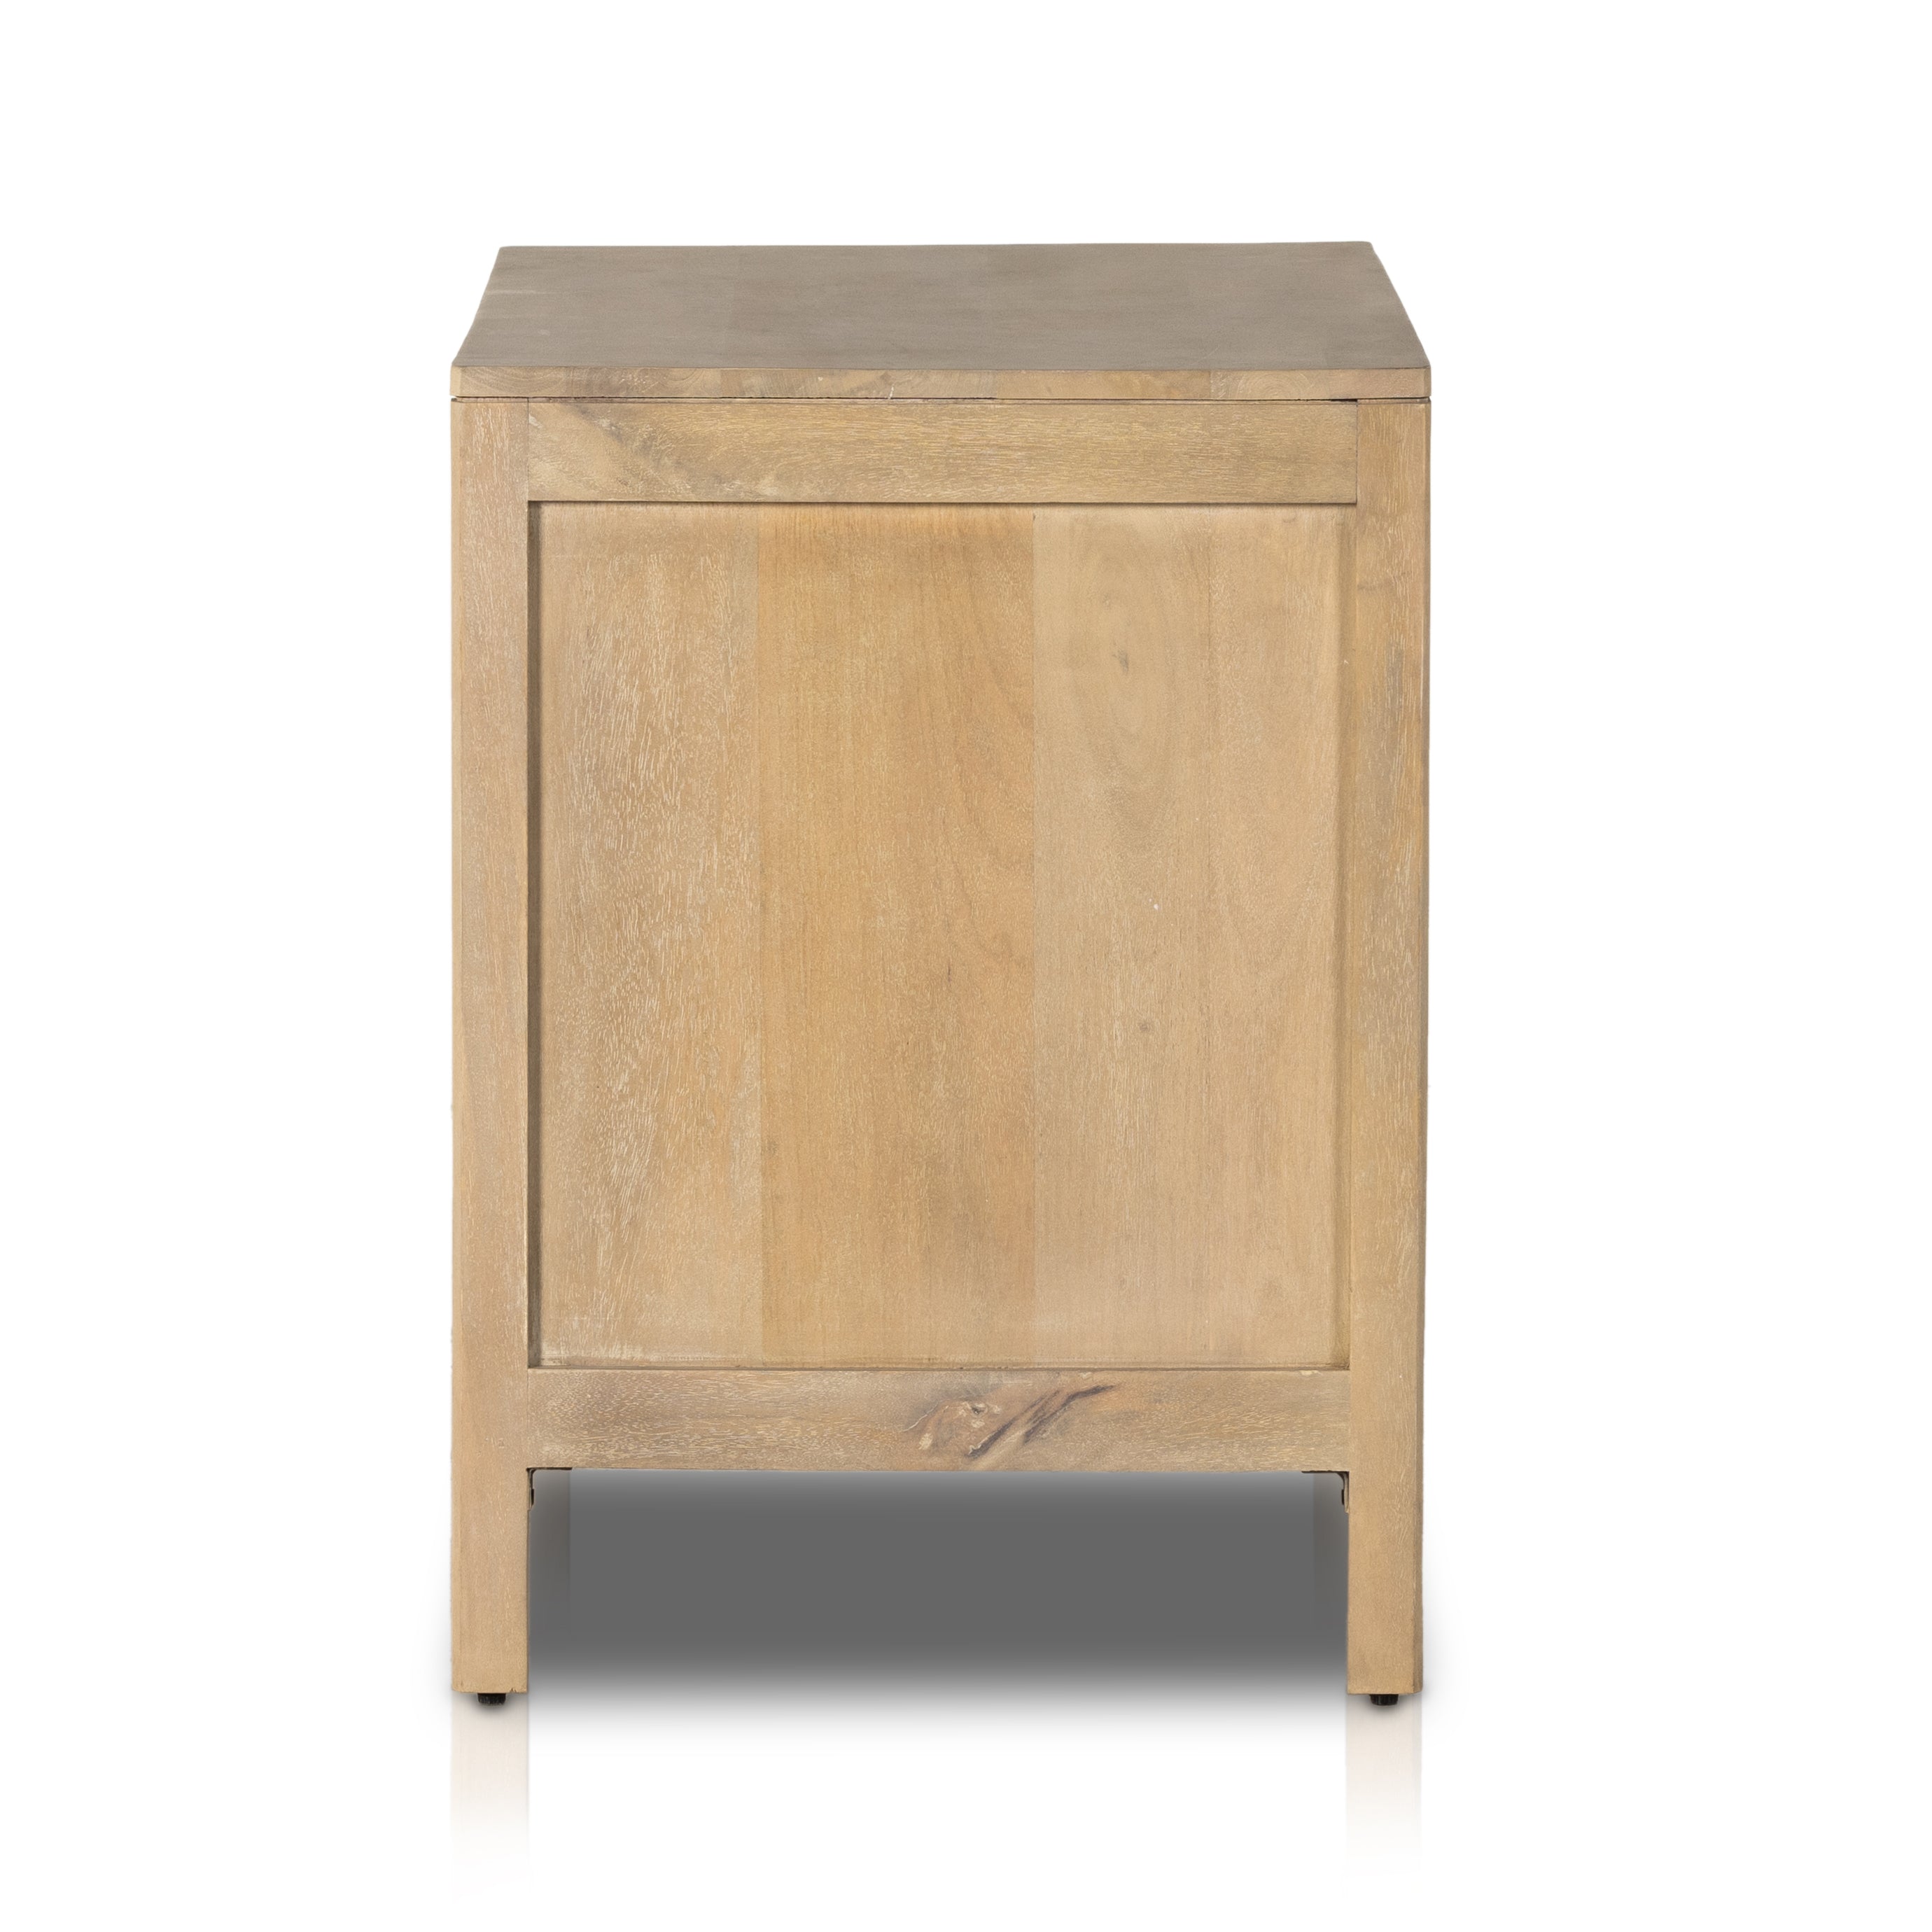 Natural mango frames inset woven cane, for a light, textural look with organic allure. Three spacious drawers provide plenty of closed storage. Amethyst Home provides interior design, new home construction design consulting, vintage area rugs, and lighting in the Washington metro area.